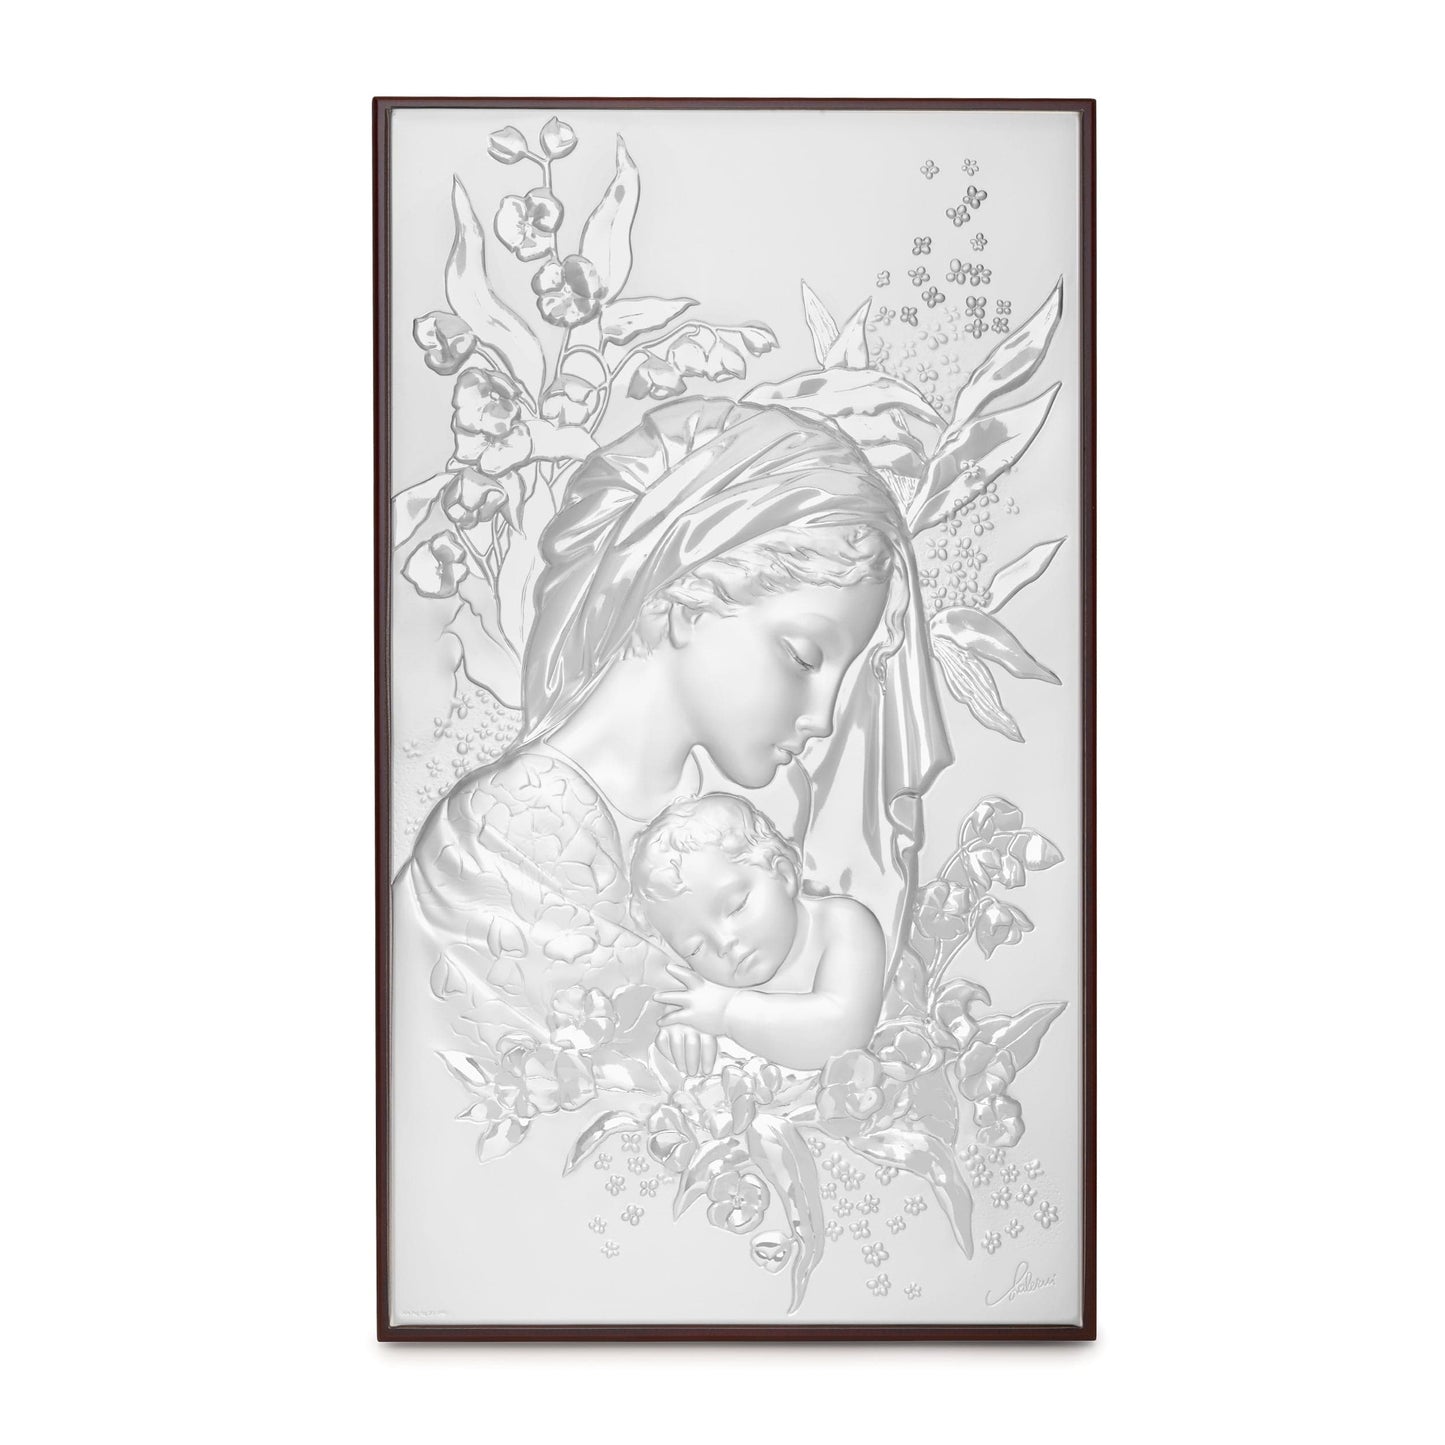 MONDO CATTOLICO Religious Picture Mother Mary and Child with Roses Bilaminated Sterling Silver